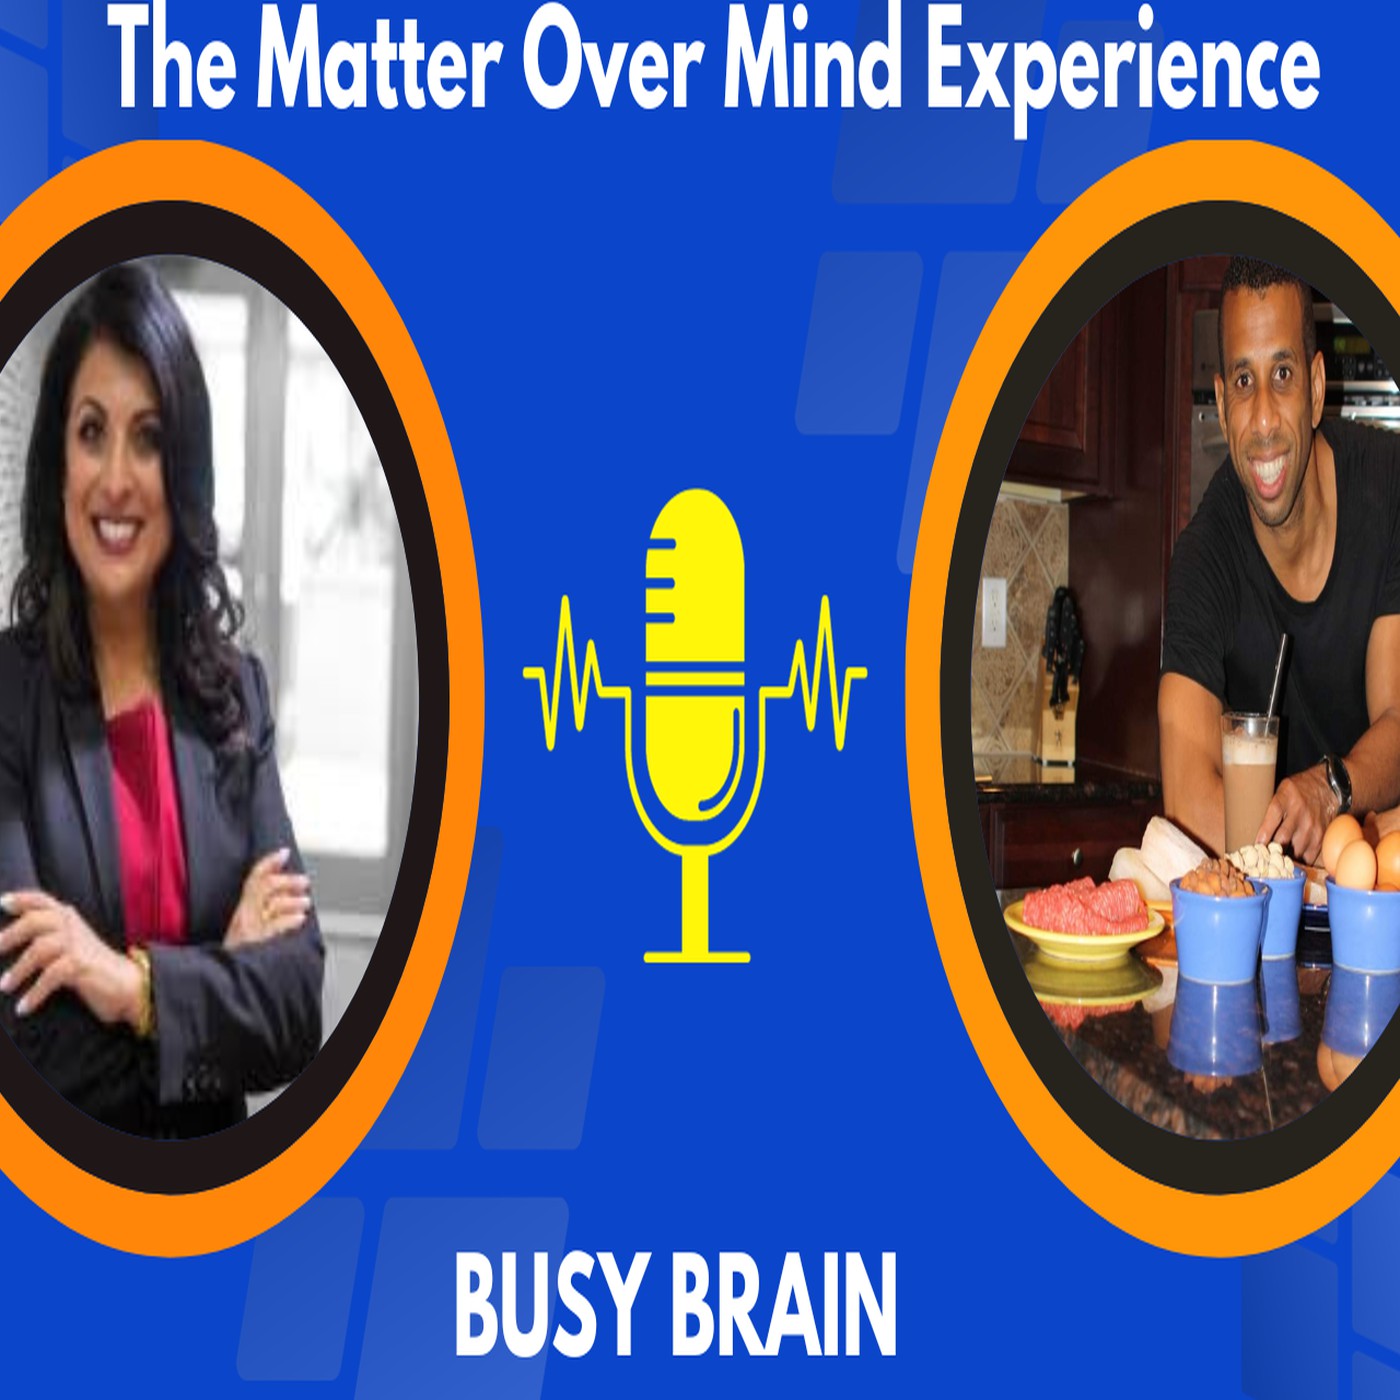 The Matter Over Mind Experience